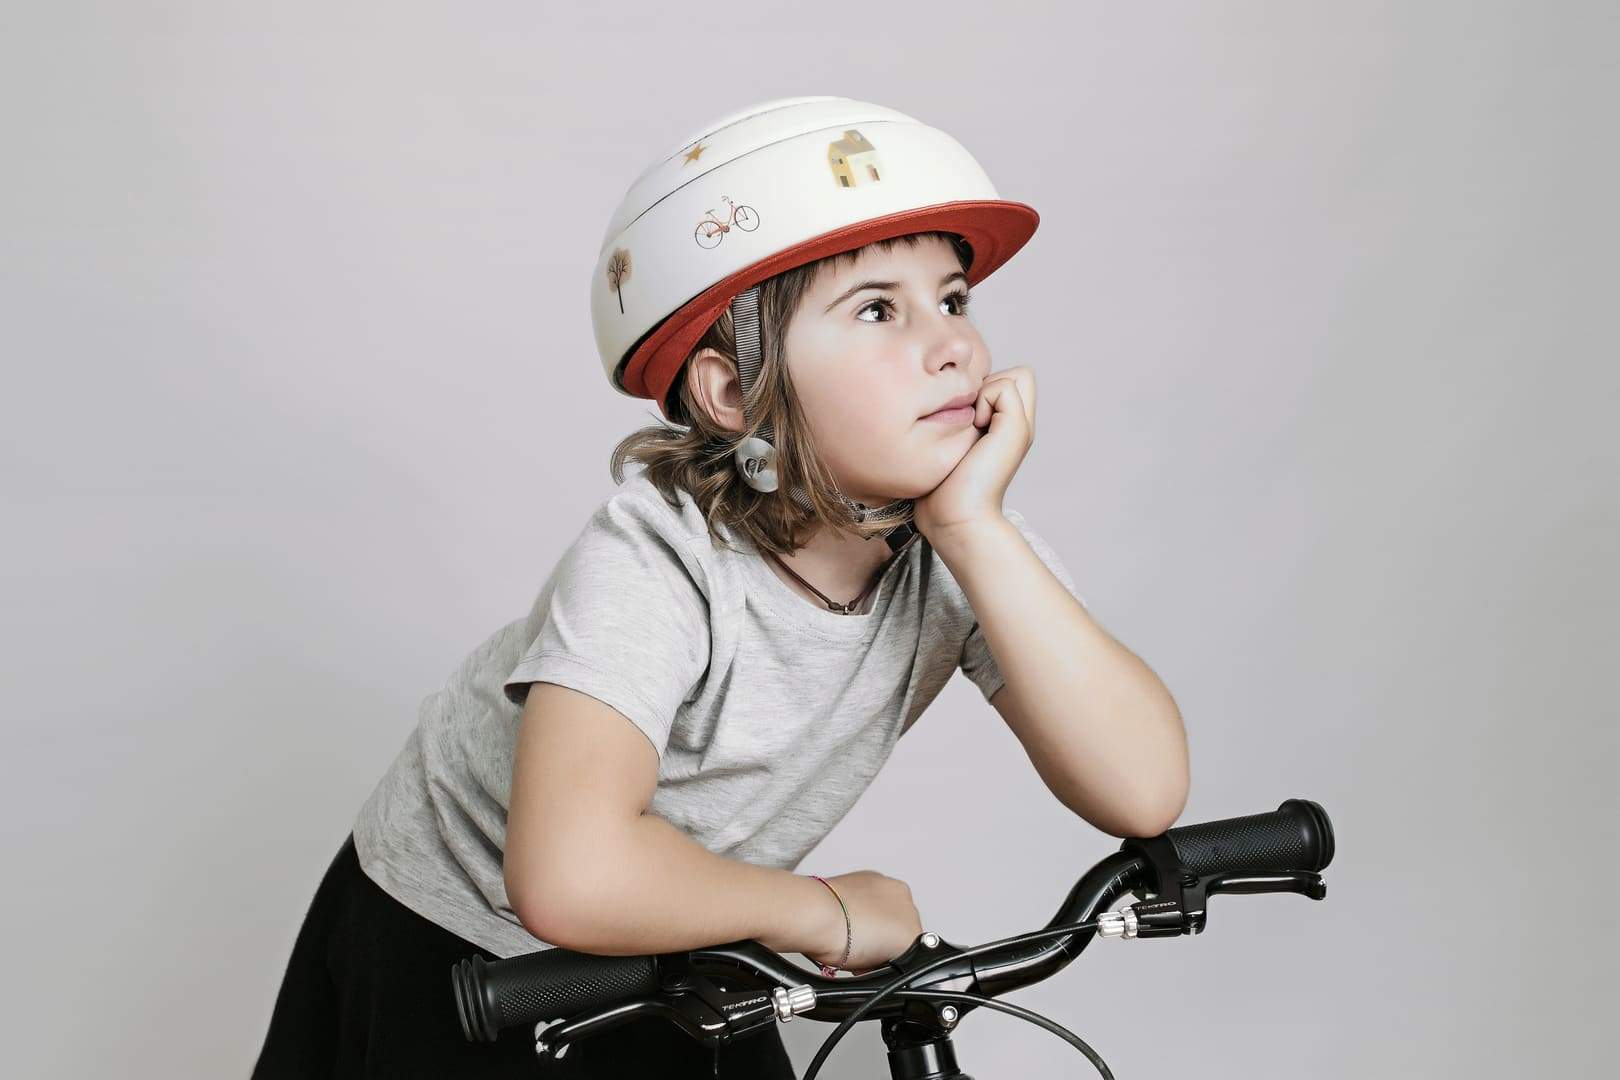 This is the folding helmet your kids will want when they ride their bikes (20MINUTOS)